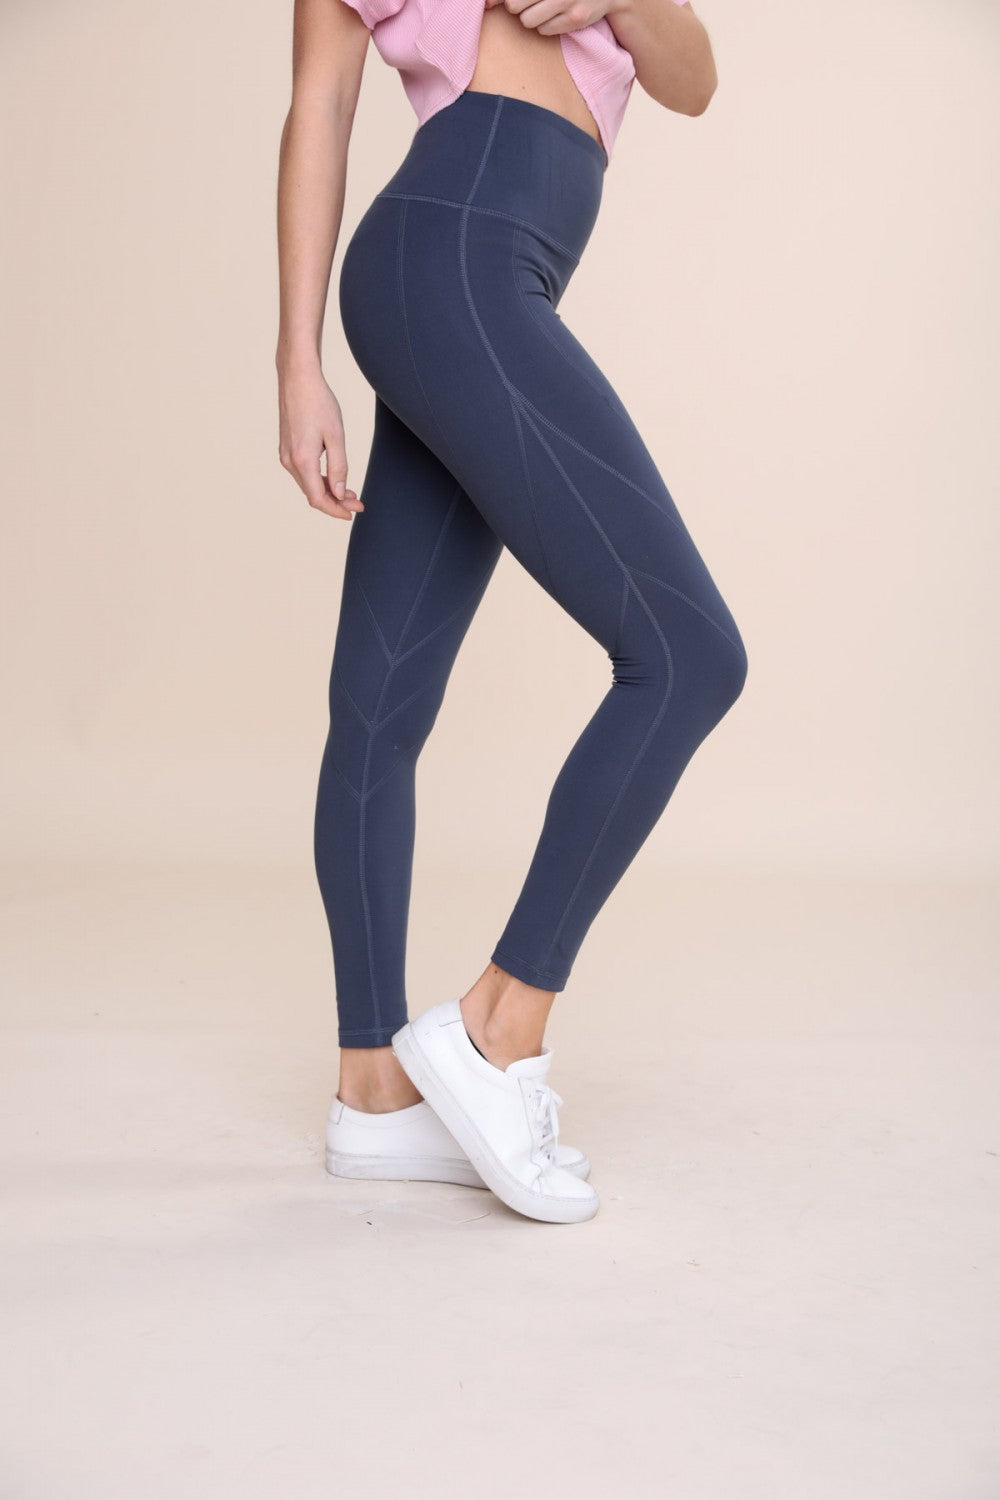 Venice High-Waist Leggings with Seam Details - APH-A0883 – The Sports Center